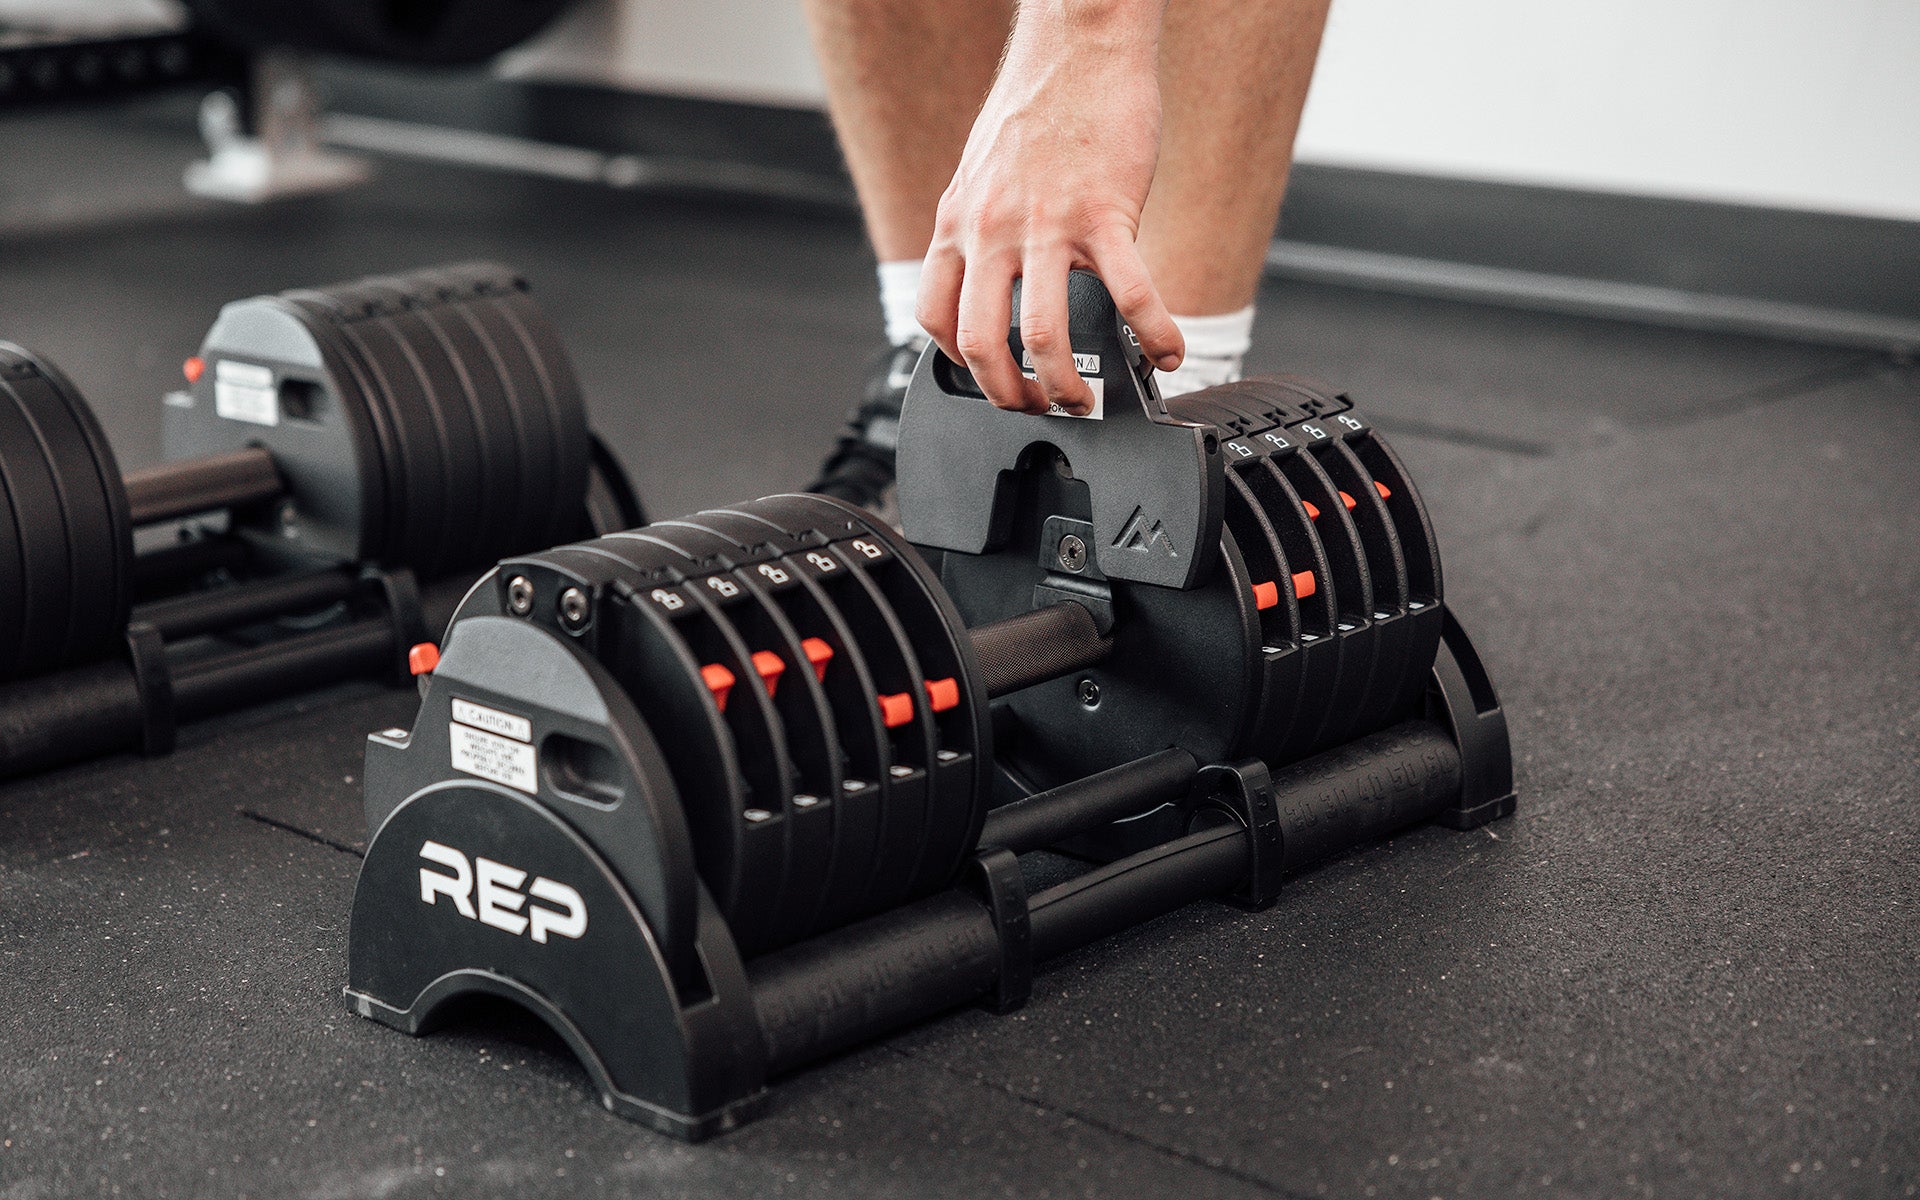 Close-up view of a lifter adding on a 2.5lb microplate to a 60lb REP Fitness QuickDraw Adjustable Dumbbell.